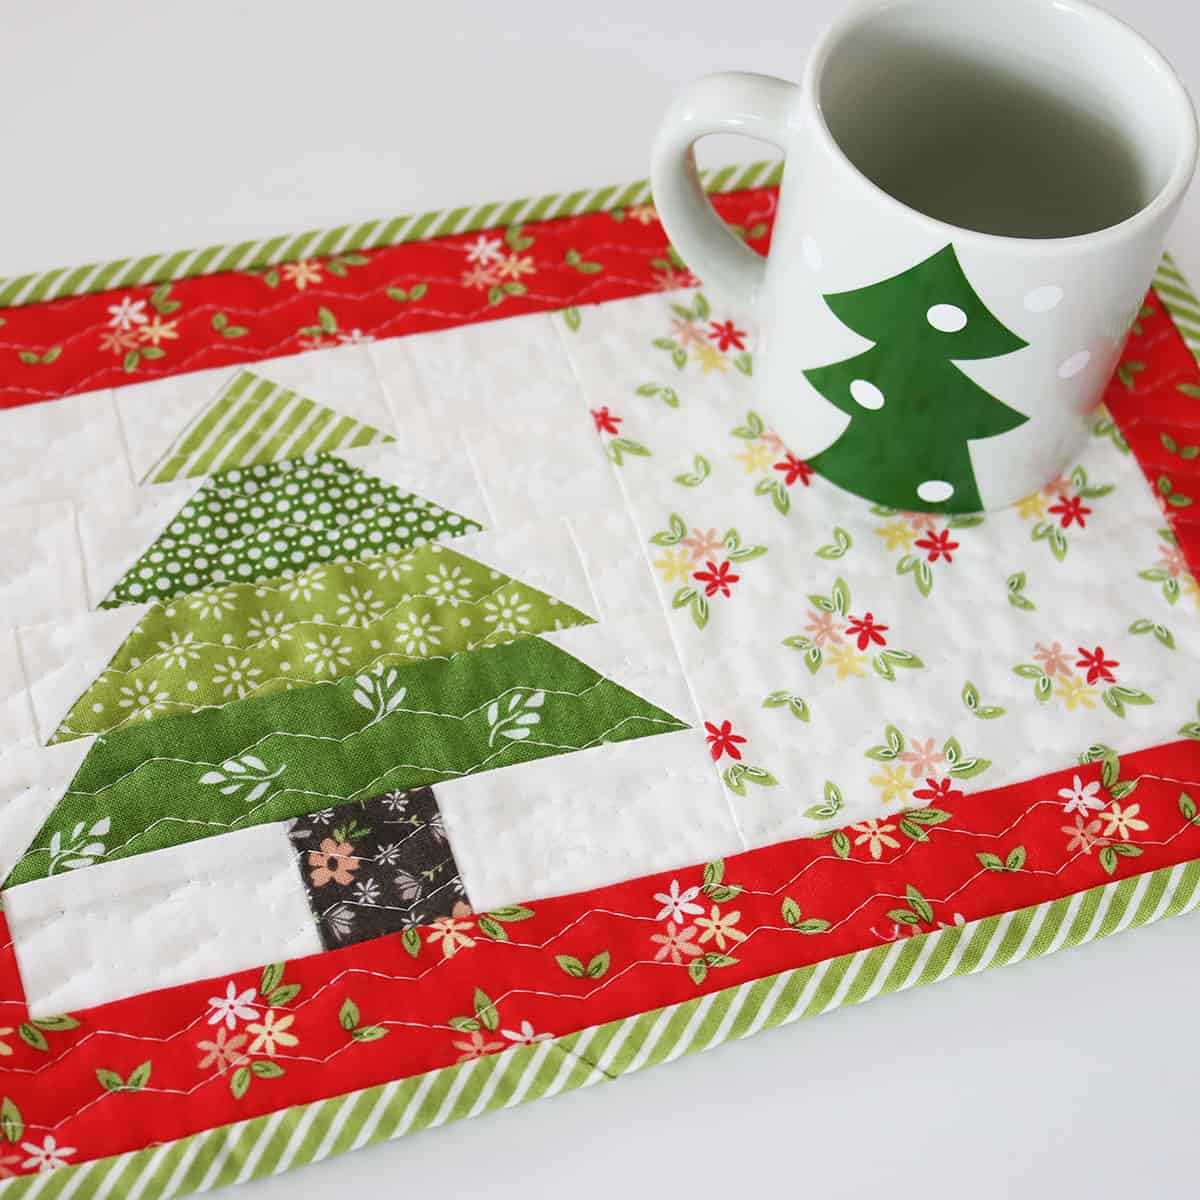 Christmas Quilt Patterns & Decorating featured by Top US Quilt Blog, A Quilting Life